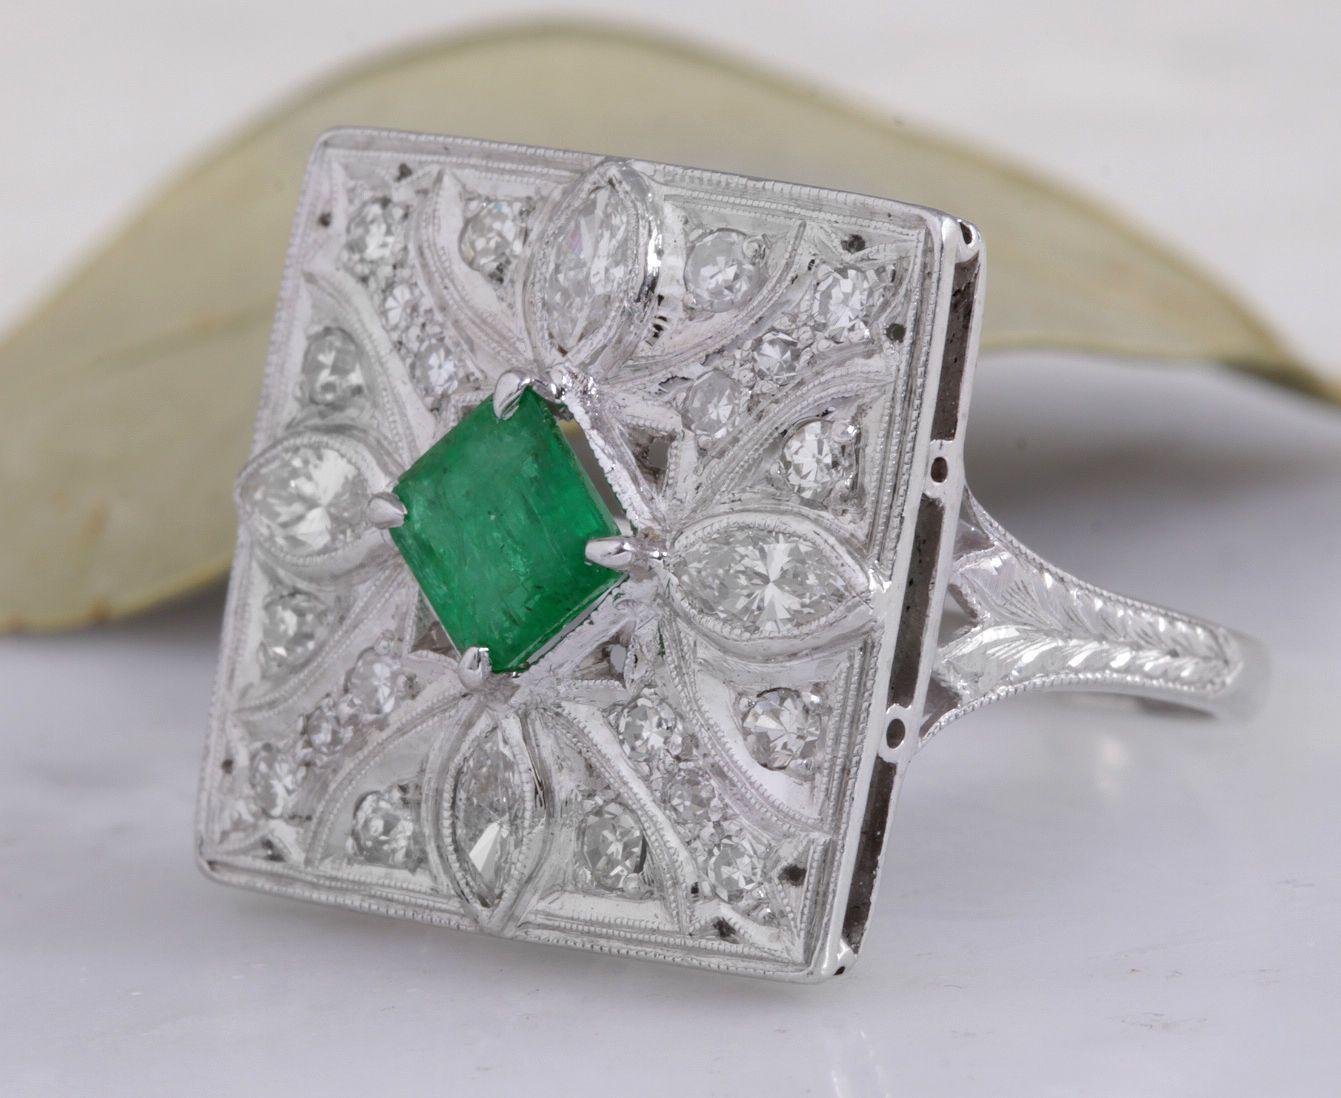 2.44 Carats Natural Emerald and VS Diamond 14K Solid White Gold Ring

Total Natural Green Emerald Weight is: .84 Carats (transparent)

Emerald Measures: 5.50 x 4.91mm

Natural Round Diamonds Weight: 1.60 Carats (color G / Clarity VS2-SI1)

Ring